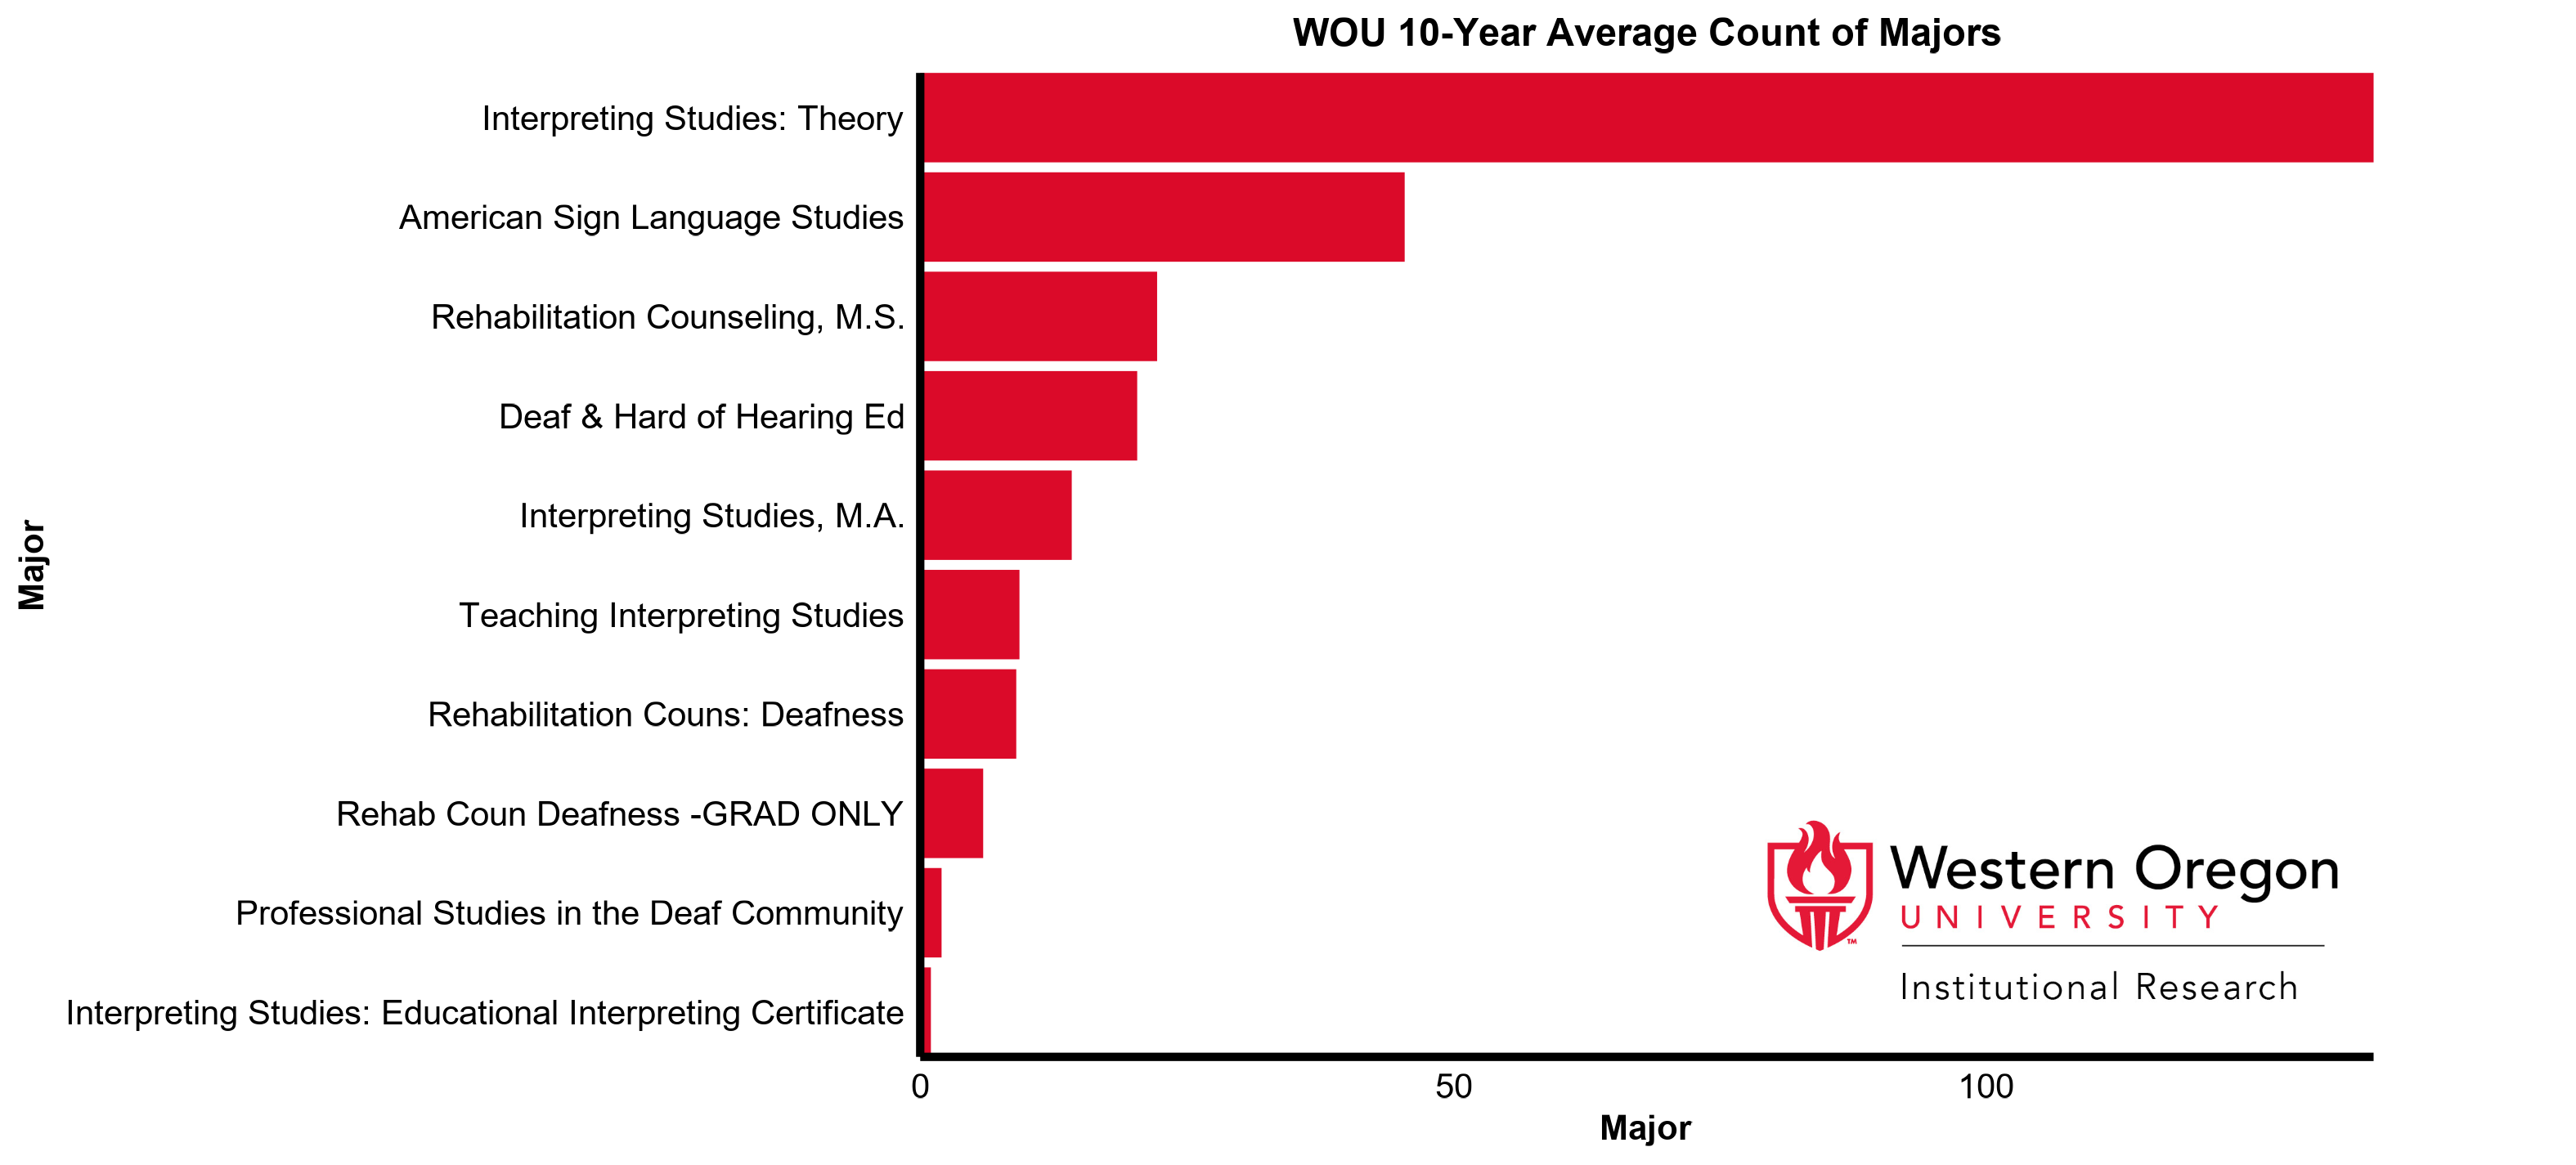 Bar graph of the 10-year average count of majors at WOU for the Deaf Studies and Professional Studies division